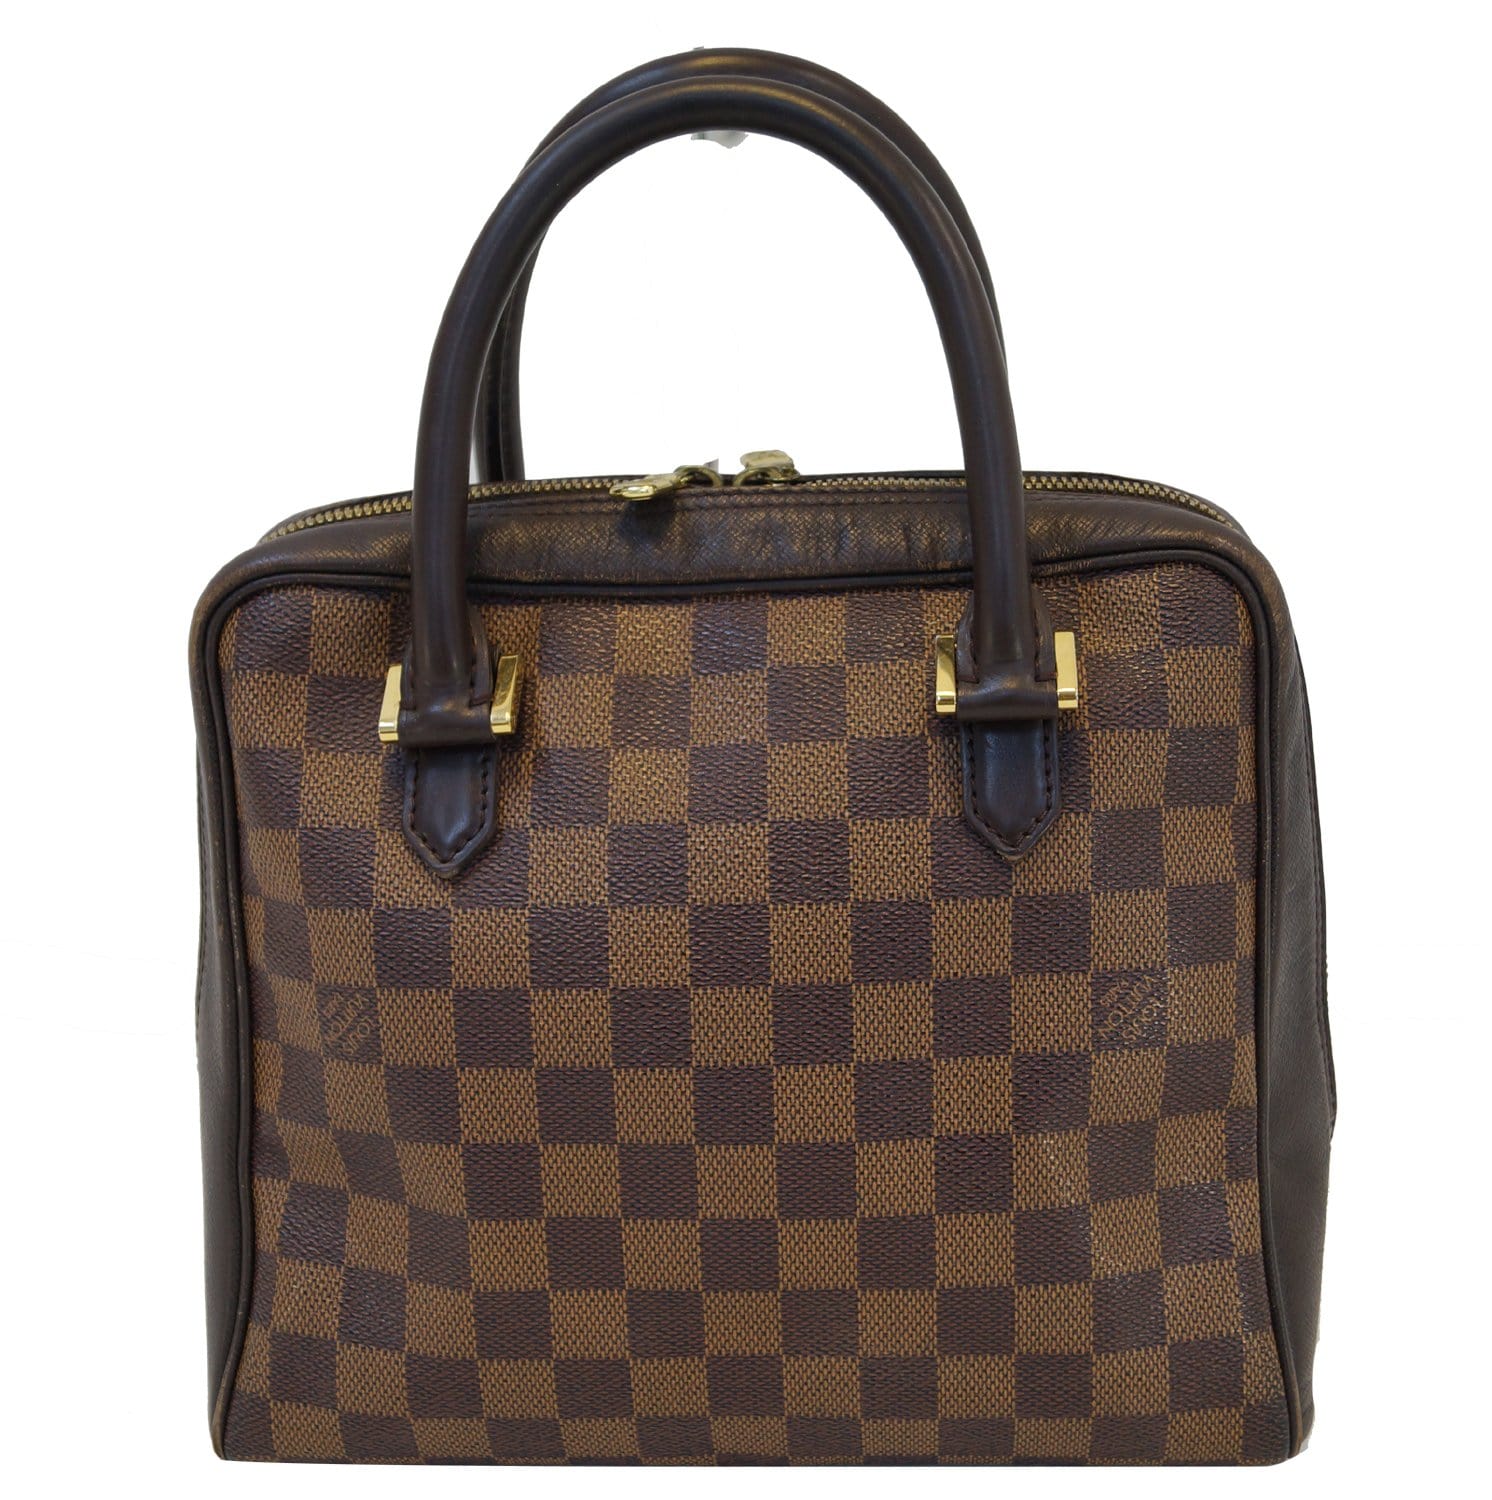 LOUIS VUITTON LOUIS VUITTON Brera Hand Tote Bag N51150 Damier Ebene Canvas  Used LV N51150｜Product Code：2101216113237｜BRAND OFF Online Store